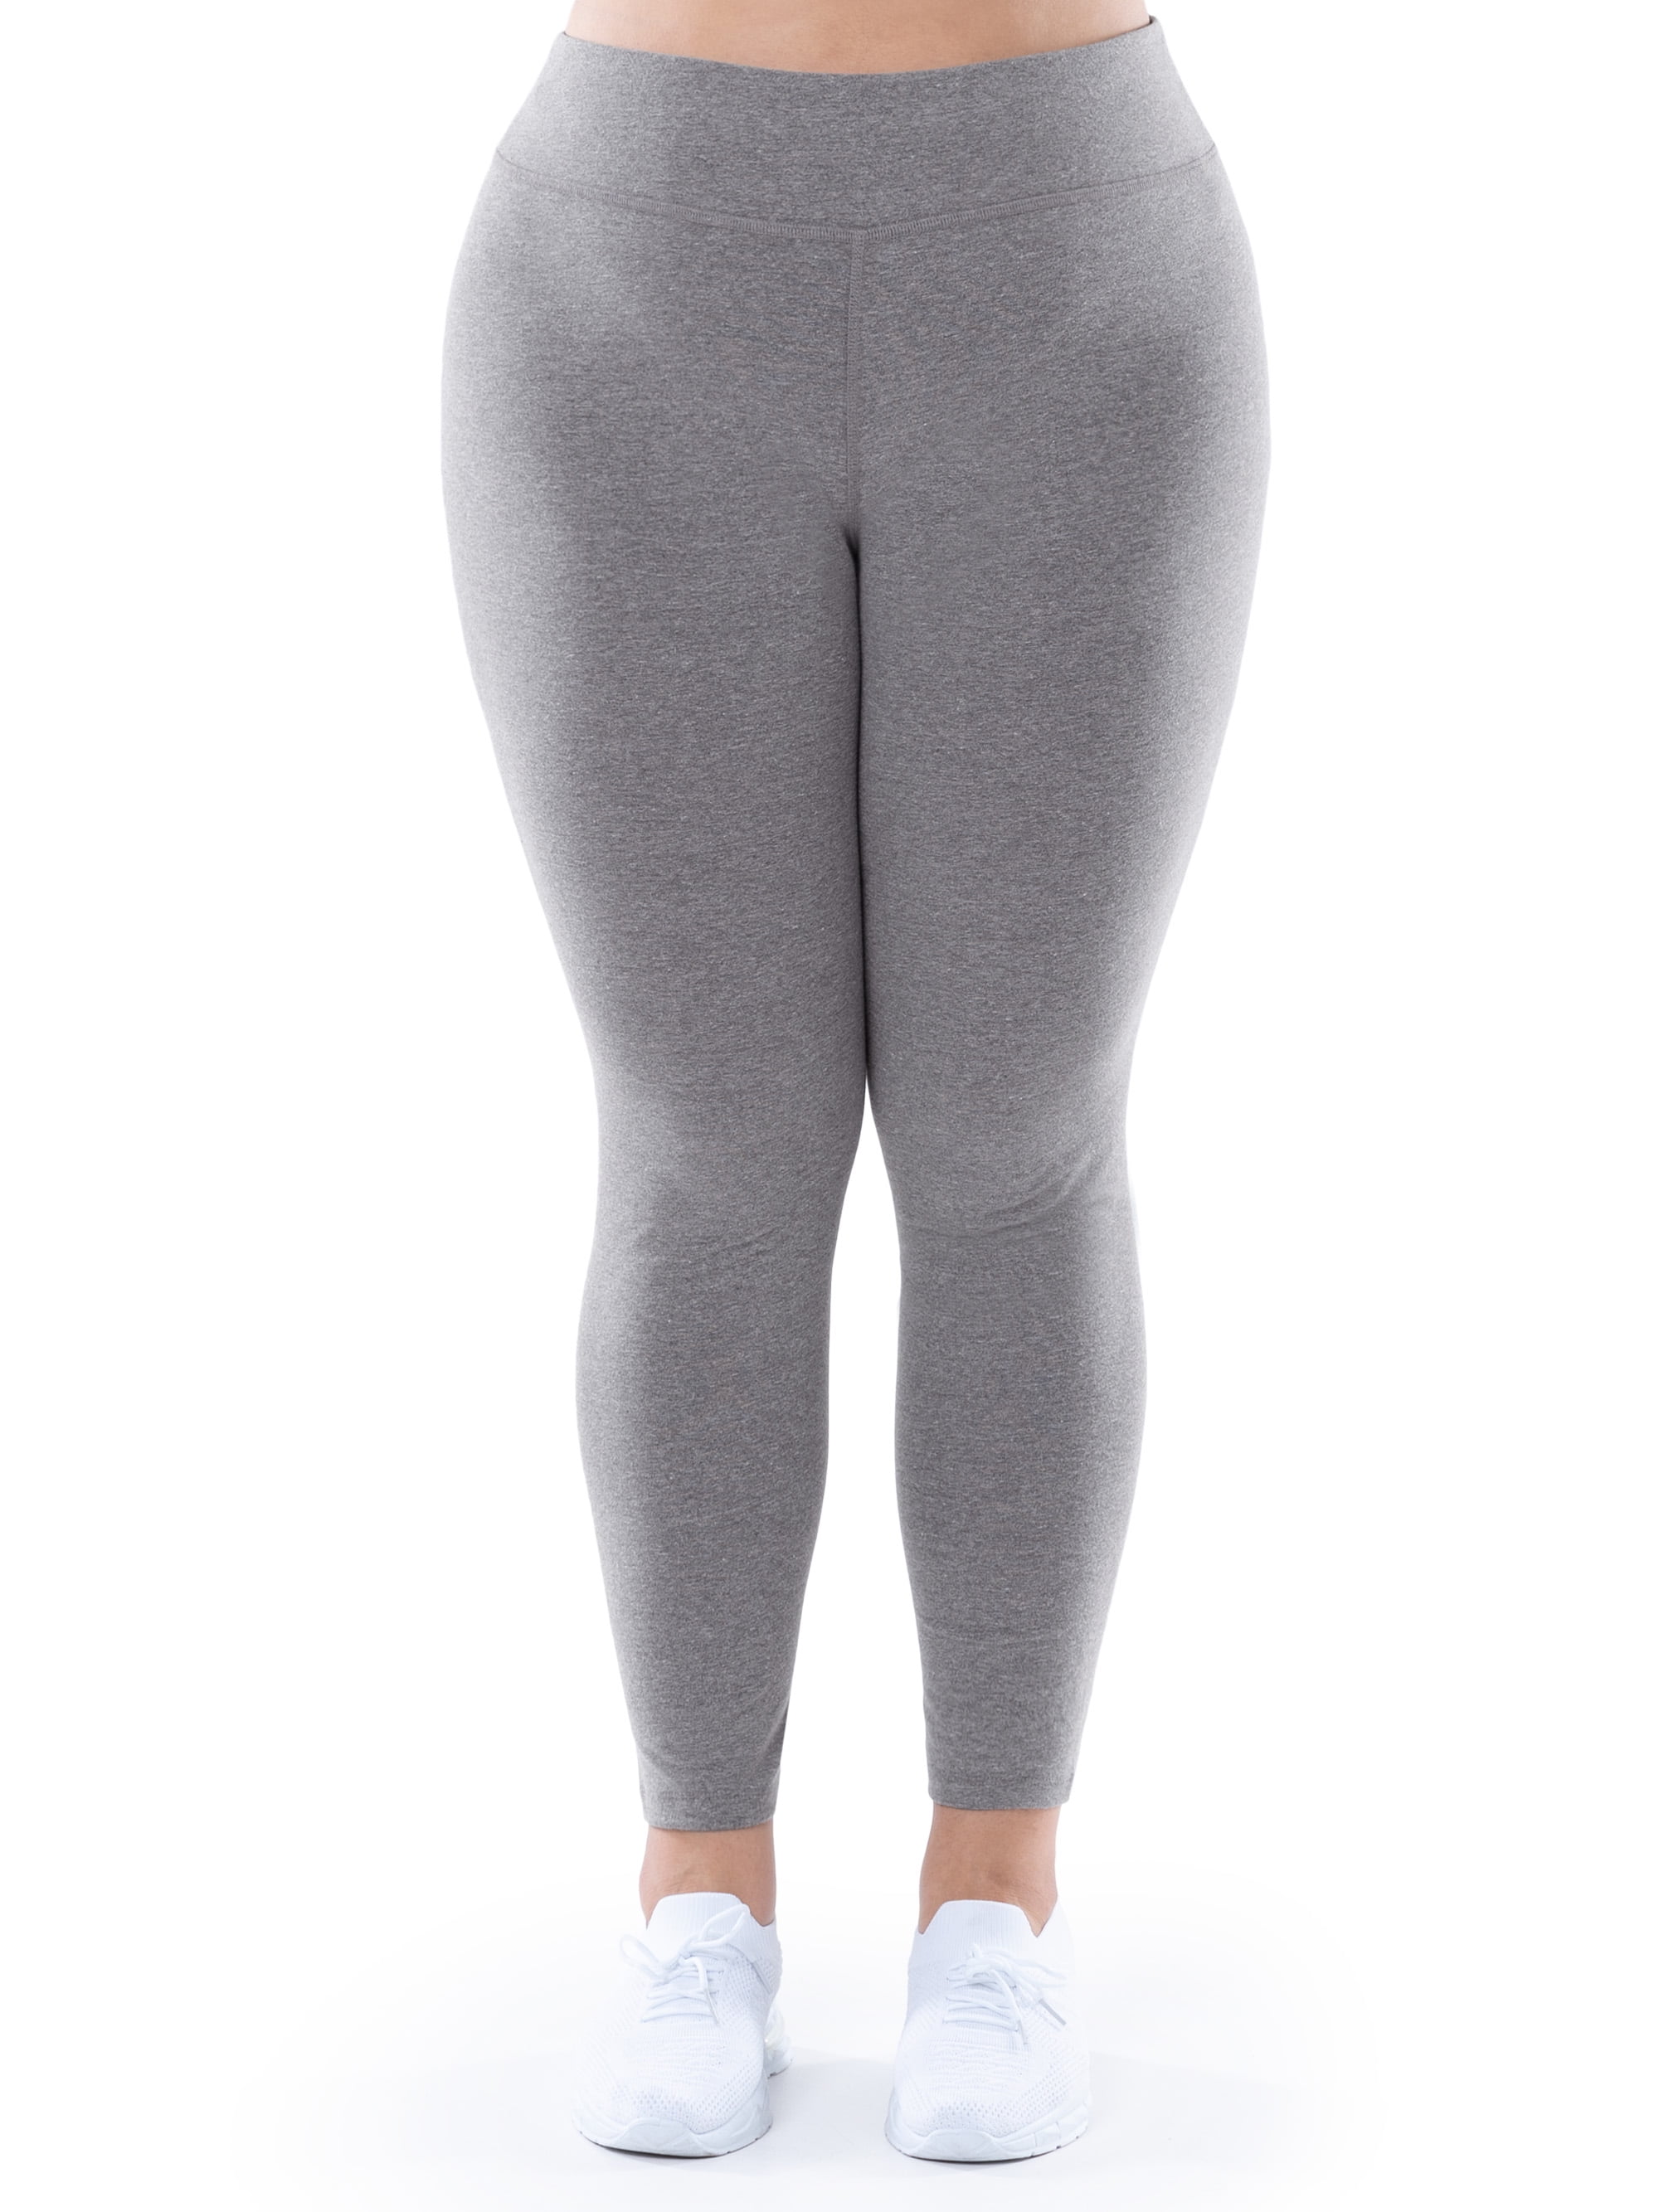 Plus Size - Performance Core Full Length Active Legging with Side Pockets -  Torrid